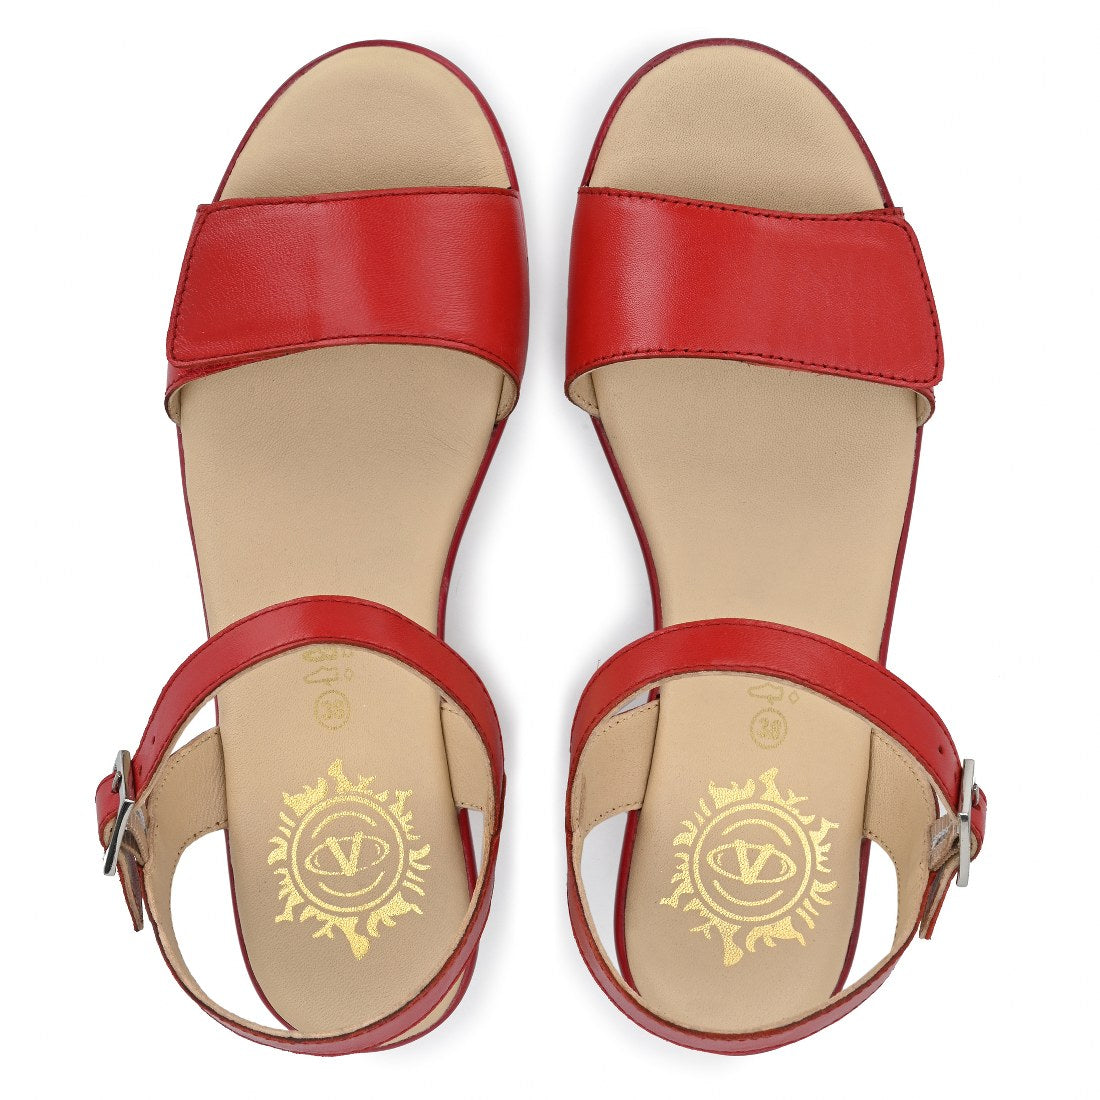 W-HR-FRISCO-51 WOMEN LEATHER RED CASUAL SANDAL OPEN